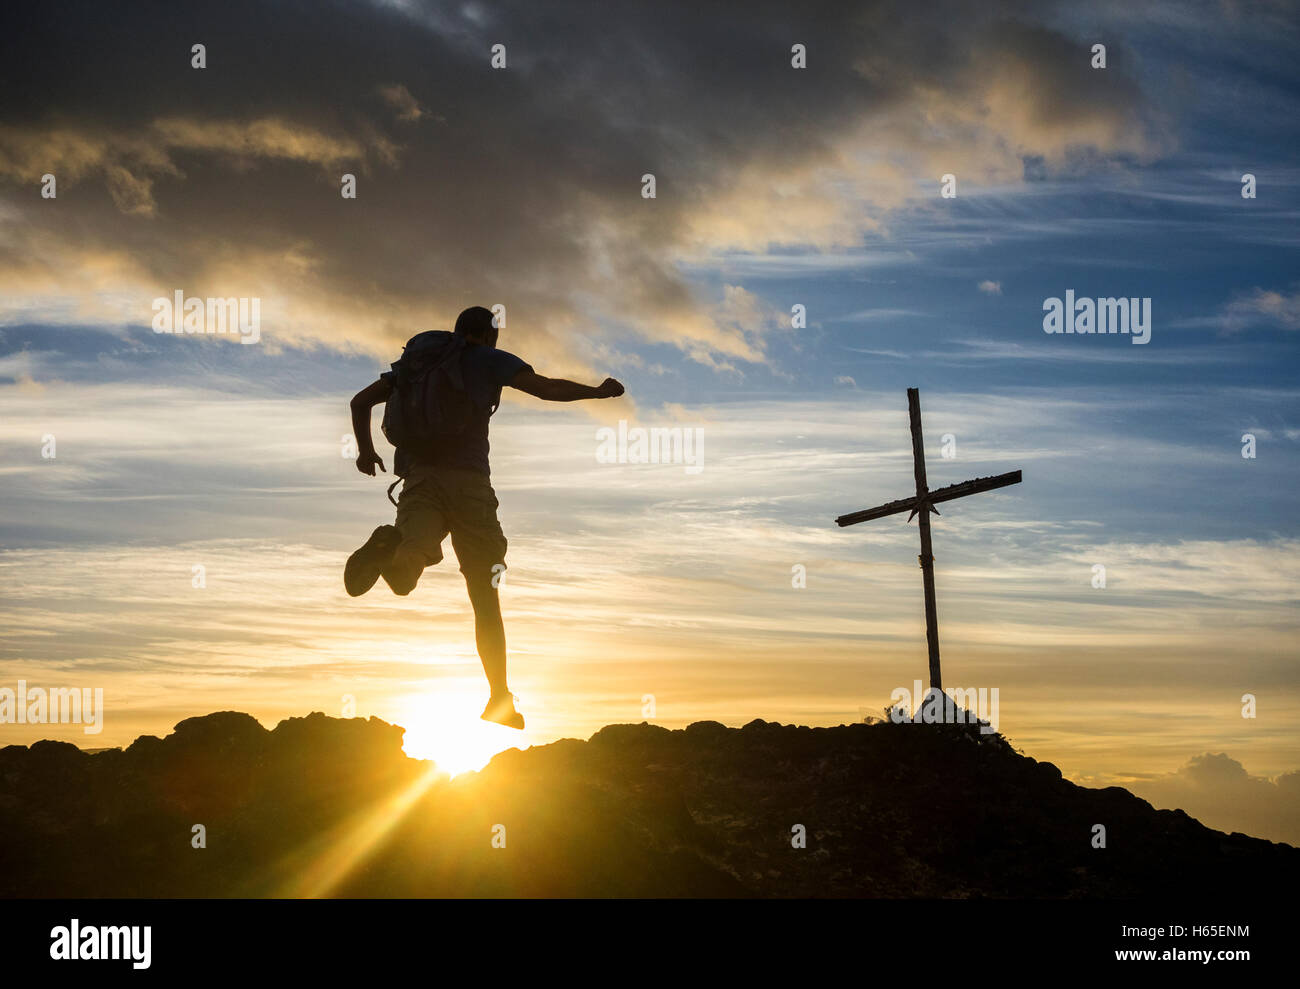 Las Palmas, Gran Canaria, Canary Islands, Spain. 25th Oct, 2016. Weather: Calm before the storm. A hiker at sunrise on volcanic mountain overlooking Las Palmas city on a day when the weather warnings have been issued for most of the Canary Islands for rain and stormy seas. Credit:  Alan Dawson News/Alamy Live News Stock Photo